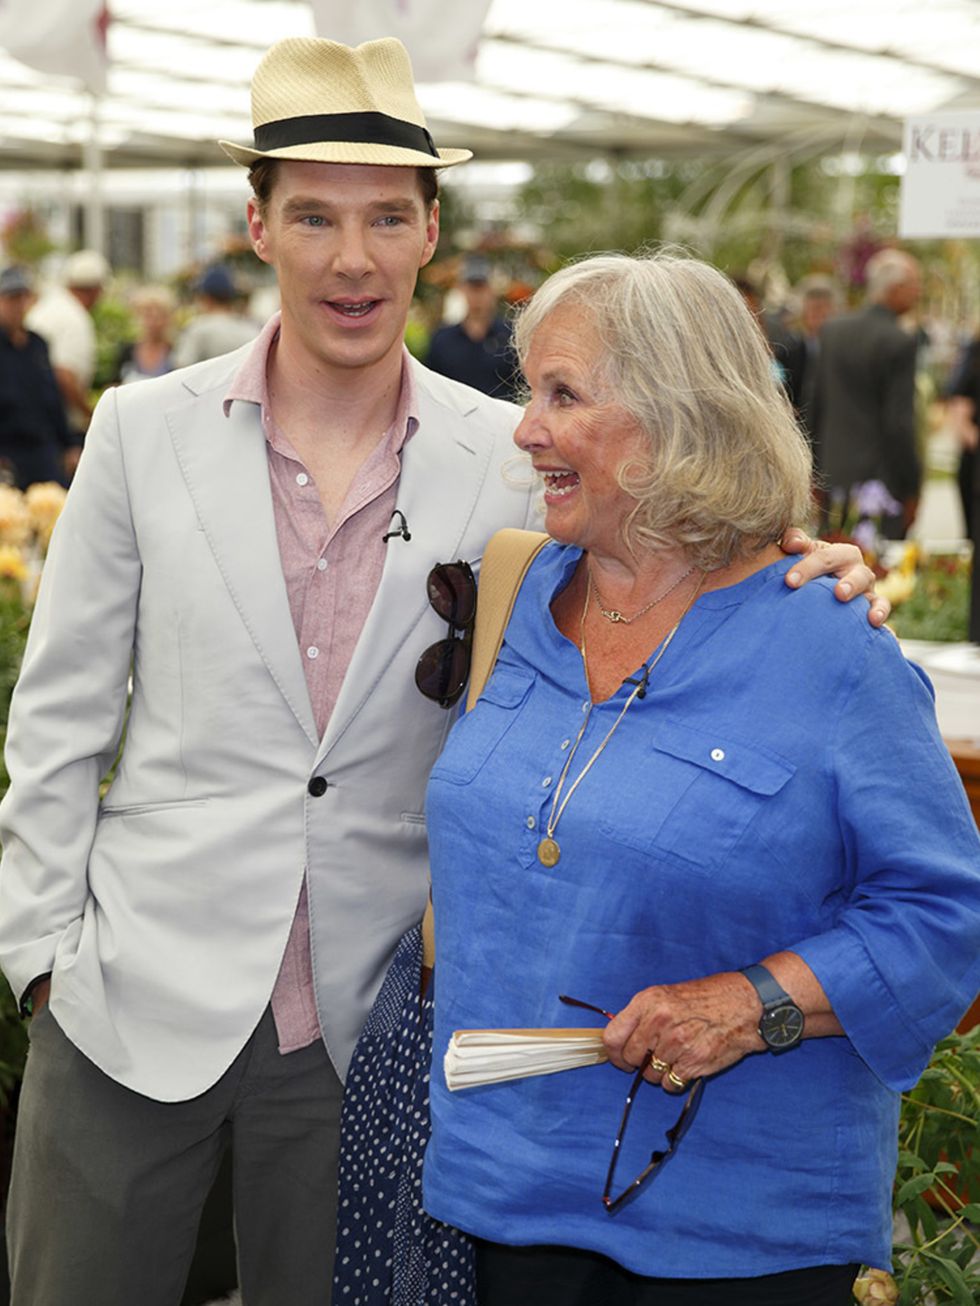 Benedict has spoken about his closeness to his Mother and Father before saying that his confidence as a child came from his parents loving the f***ing life out of me.